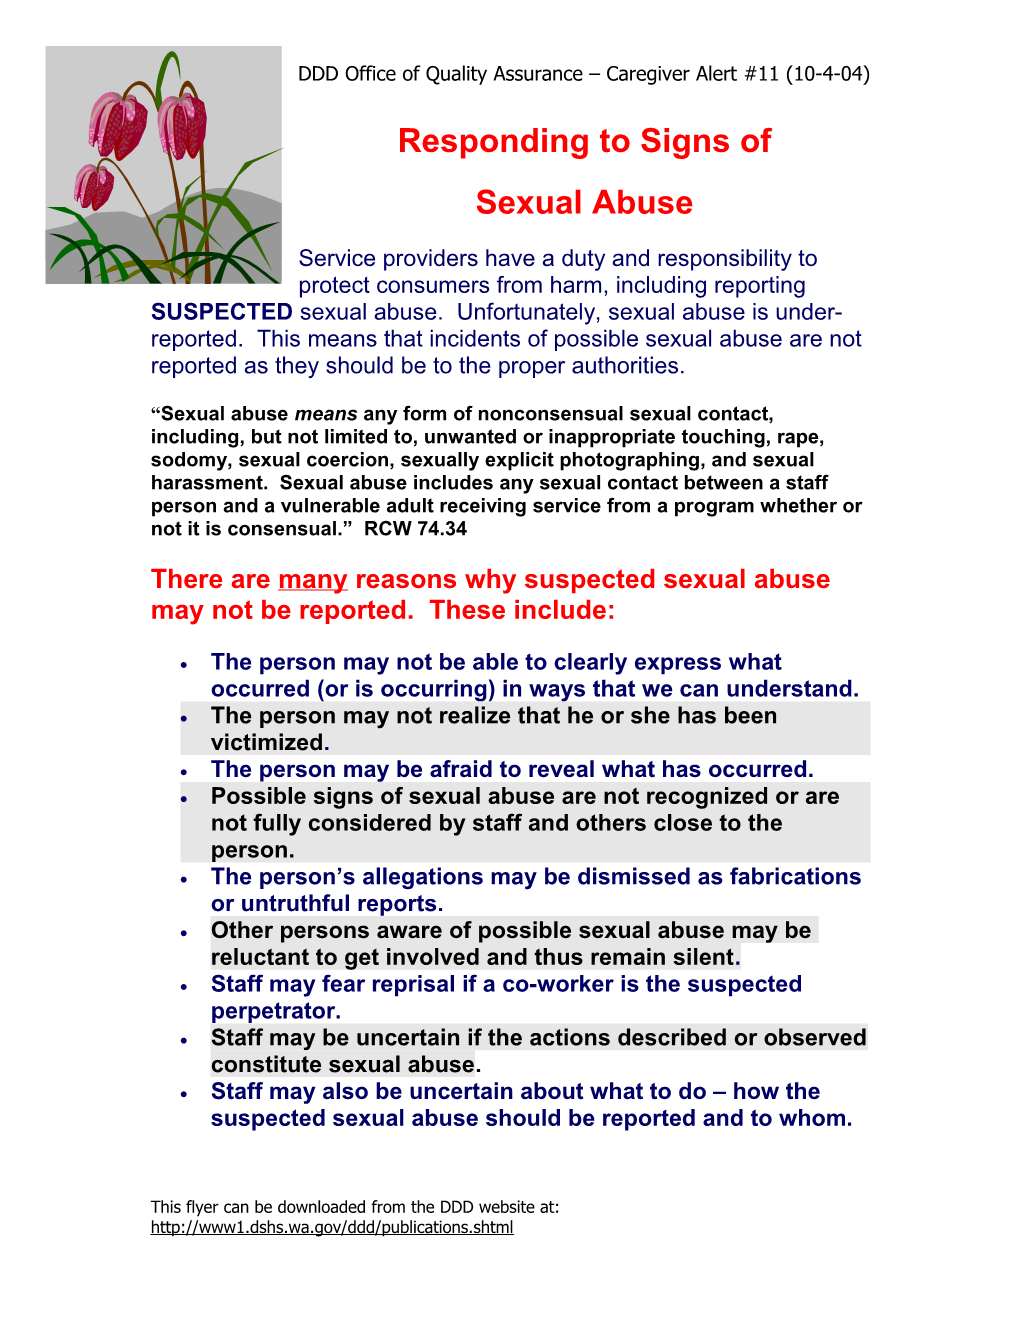 Responding to Signs of Sexual Abuse